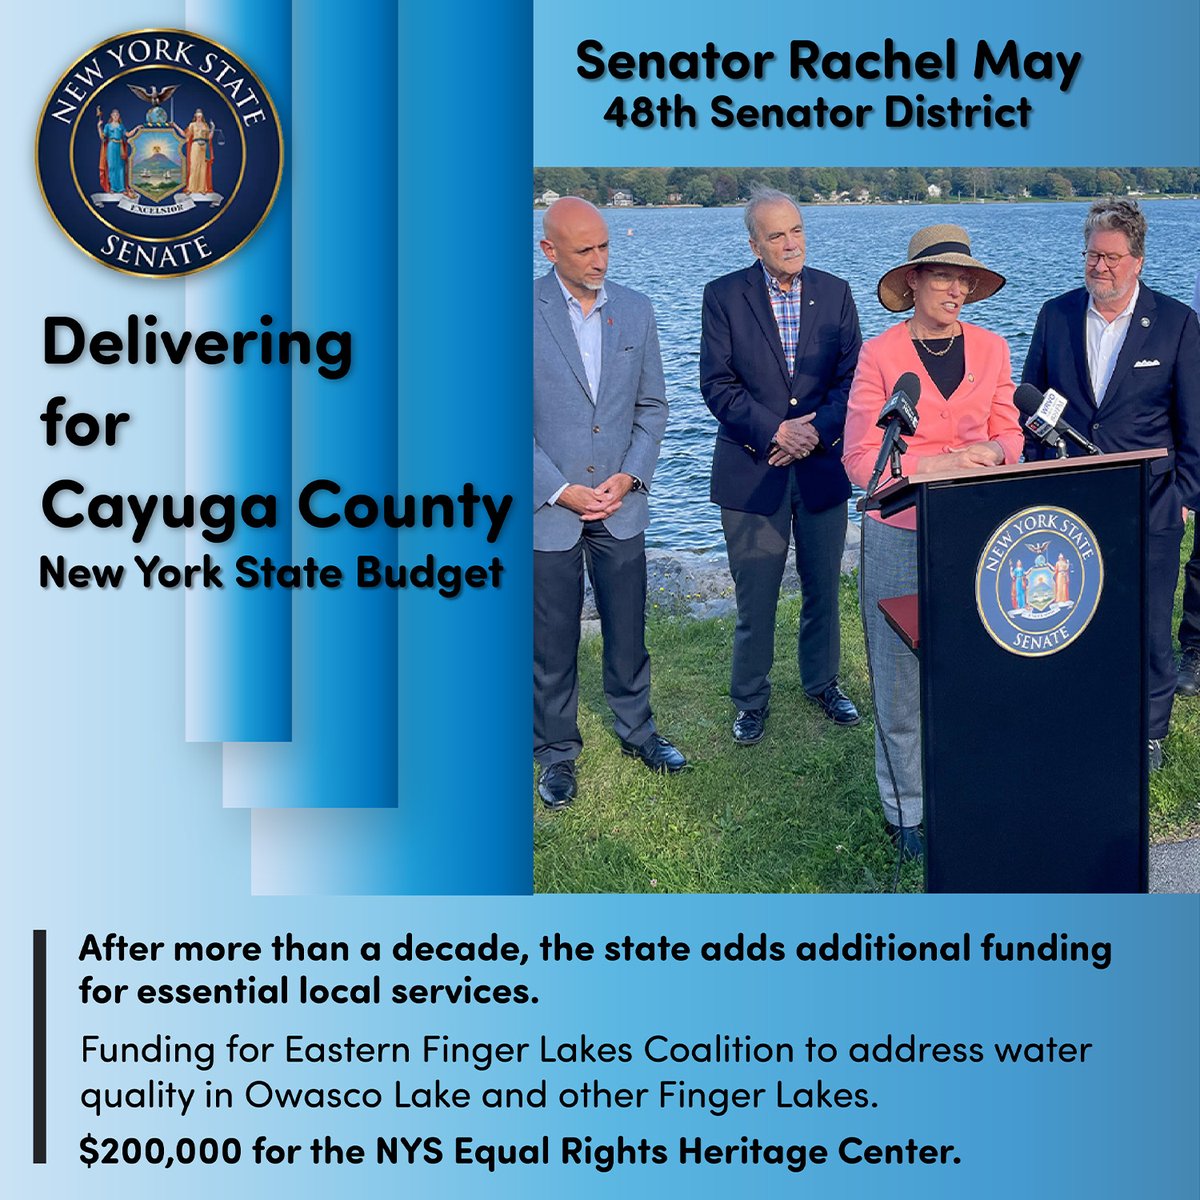 This budget offers significant benefits to Cayuga County. It prioritizes improving and safeguarding Owasco Lake's water quality, which is a primary concern for the region. It also funds essential local services and supports the NYS Equal Rights Heritage Center.